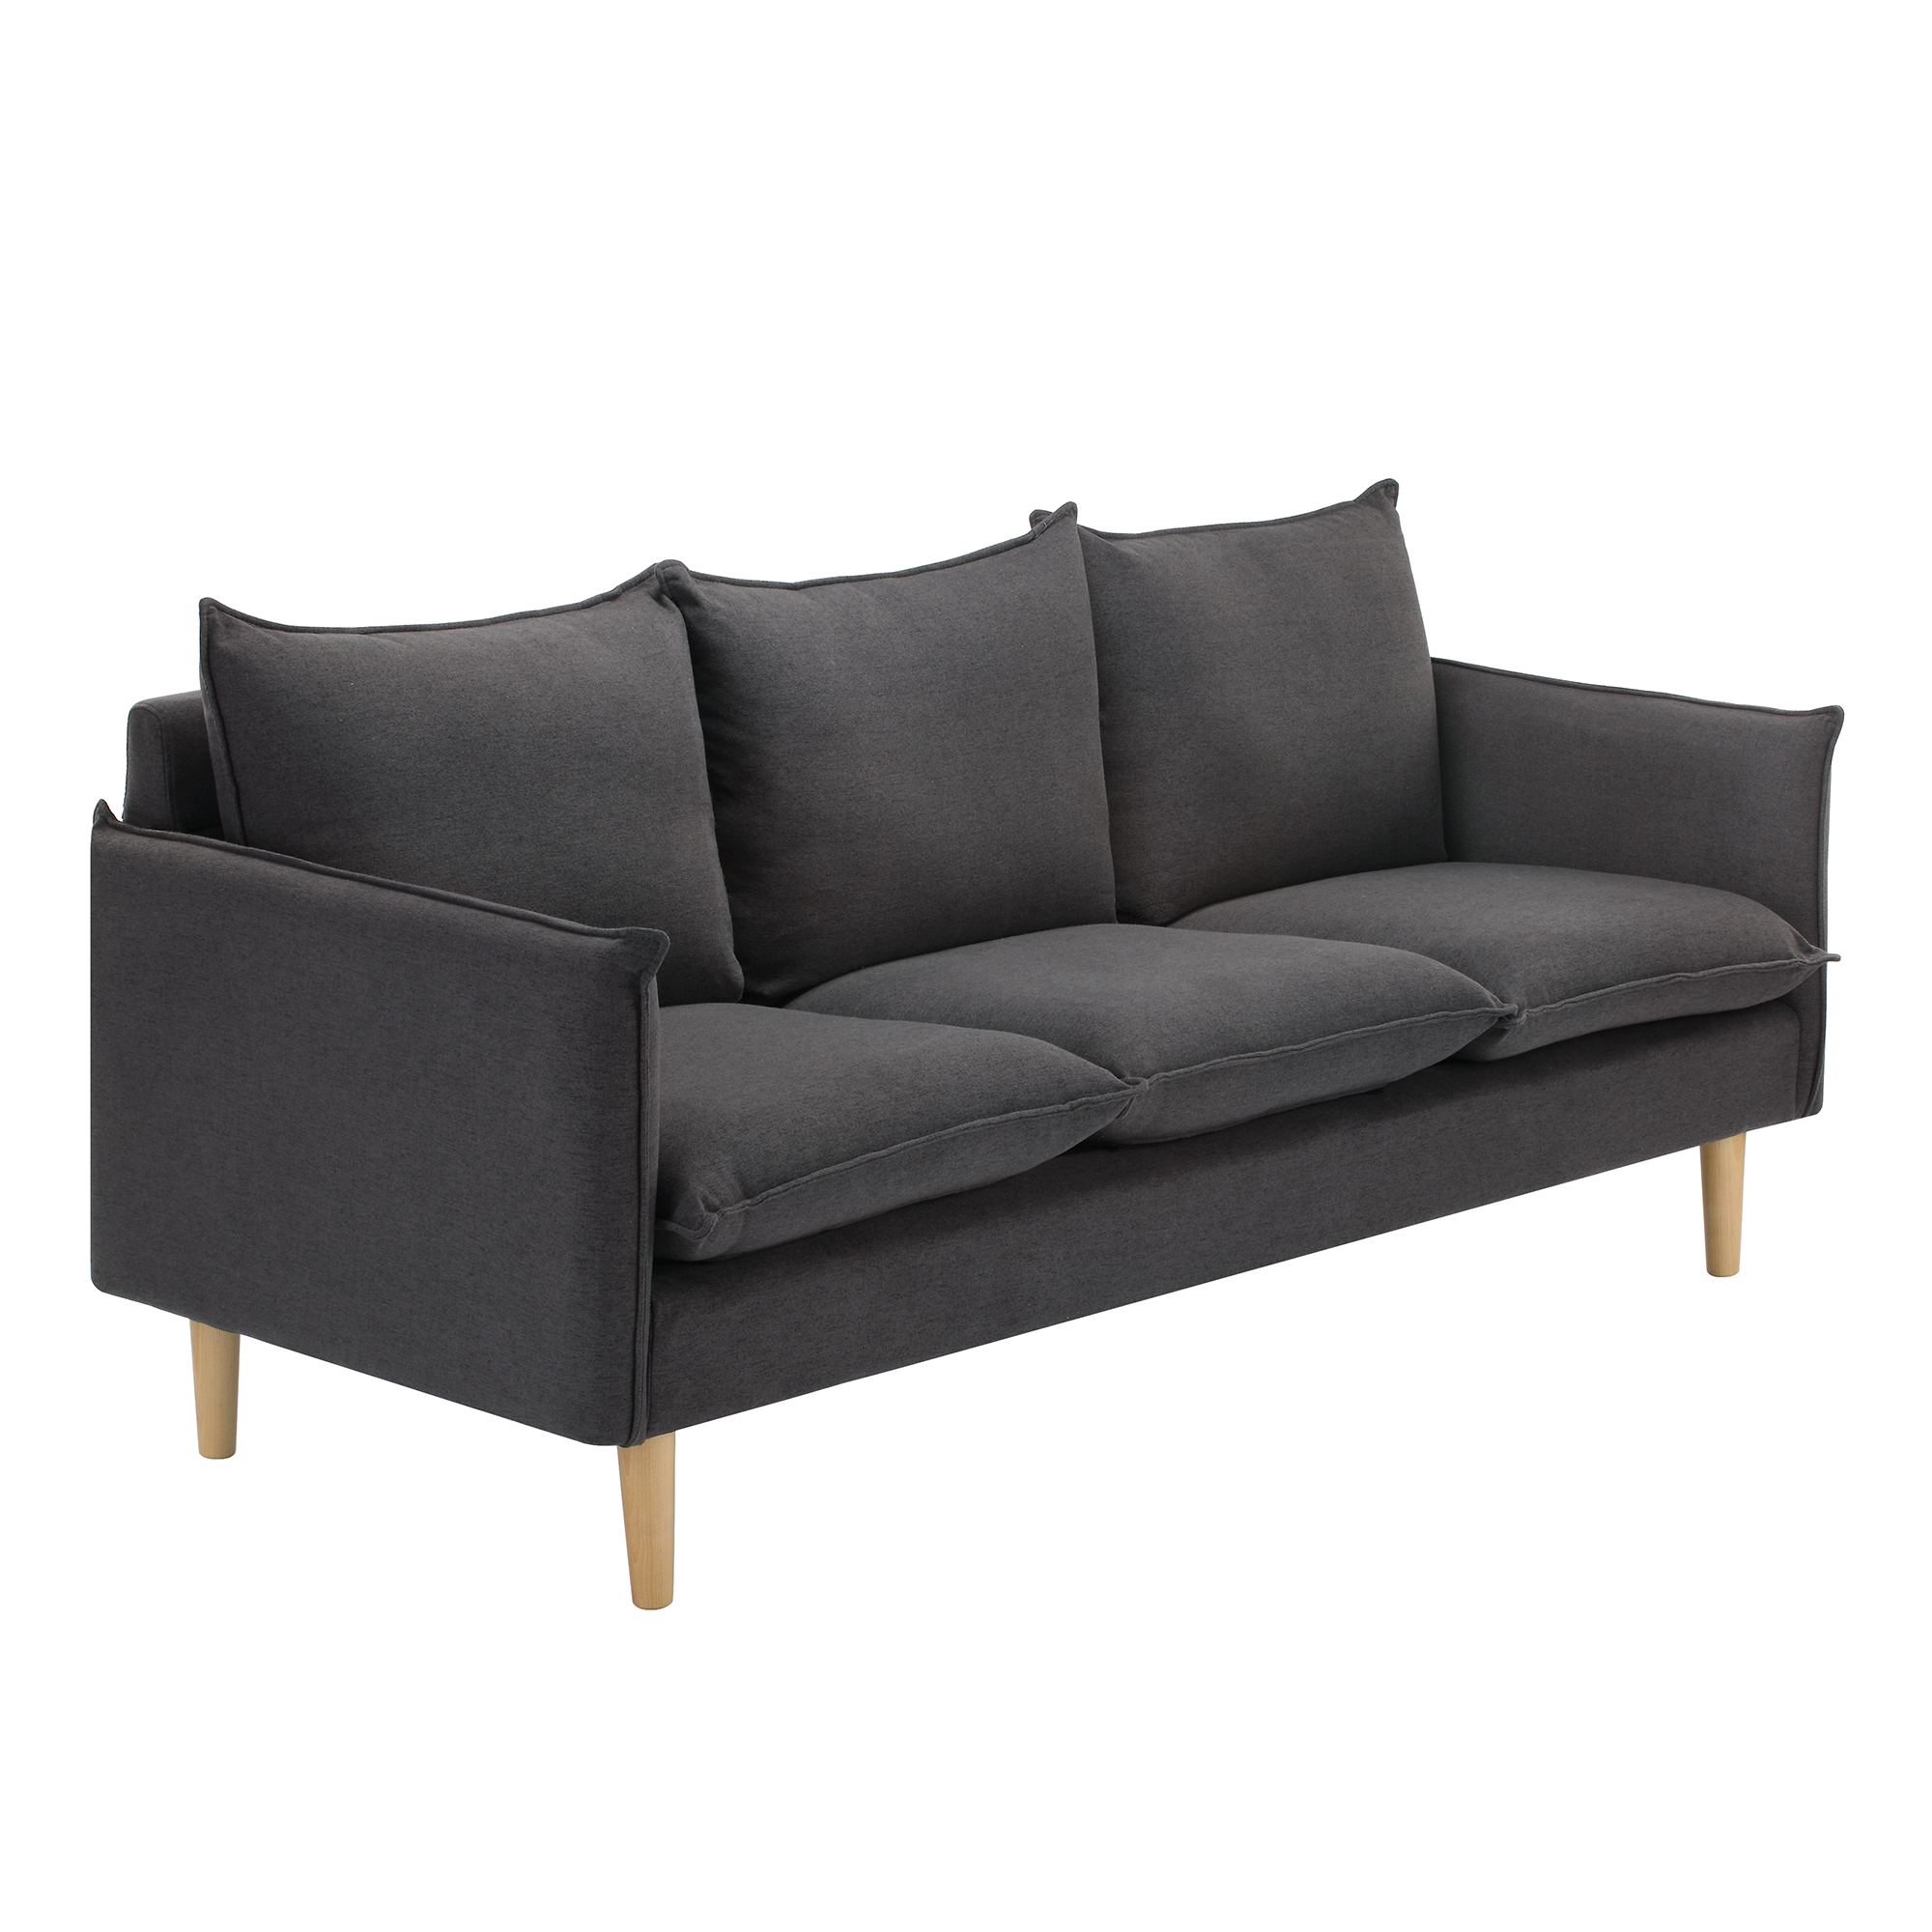 Temple Webster Charcoal Hampstead, 3 Seater Scandinavian Style Sofa Bed